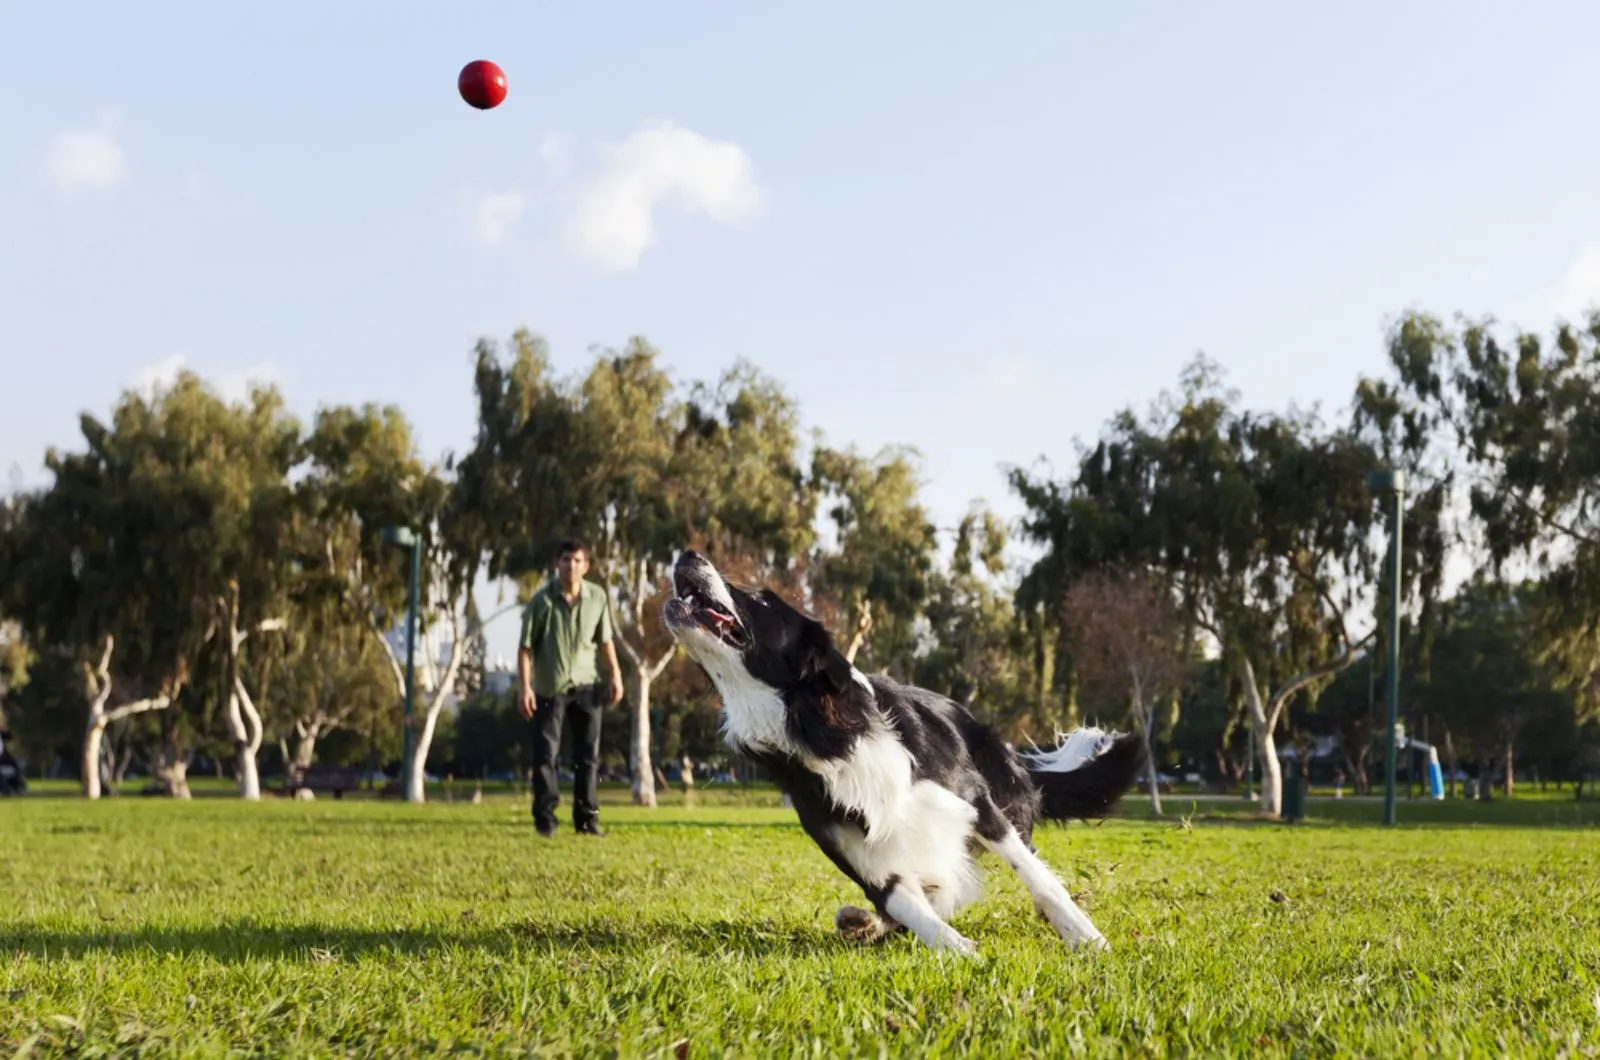 dog catching a ball while his owner looking at him